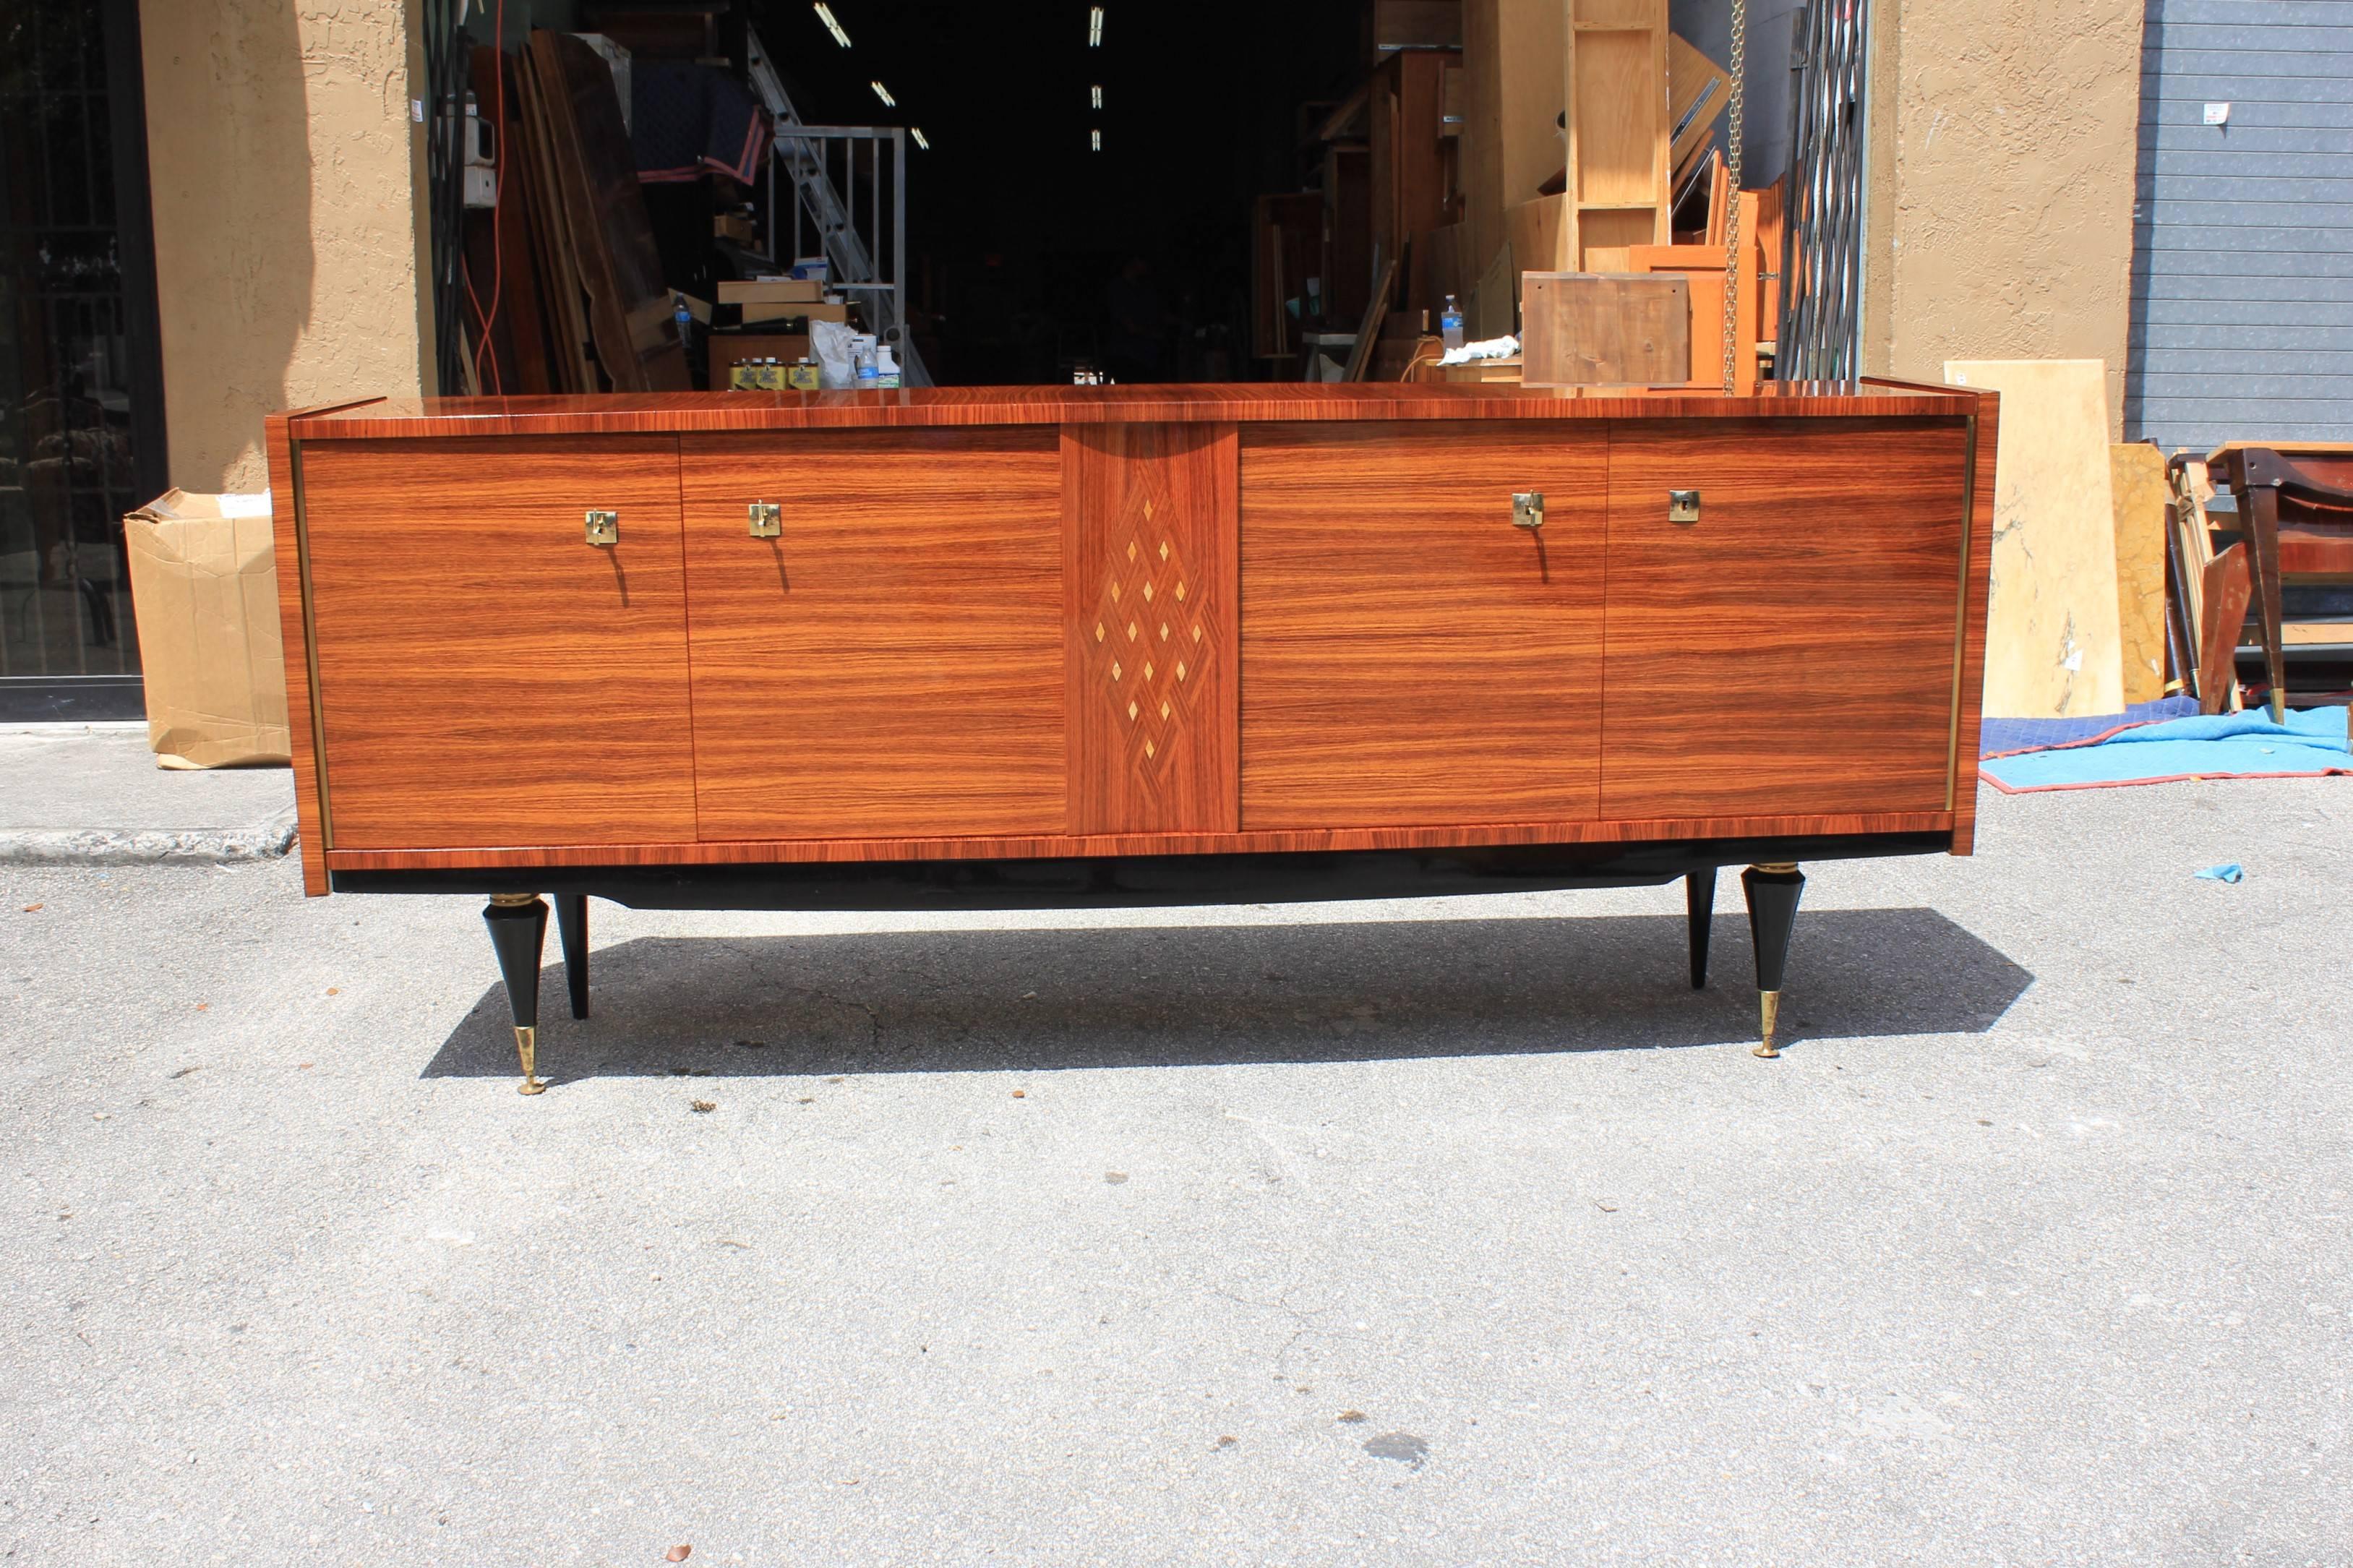 Beautiful French Art Deco Light Macassar Ebony Sideboard / Buffet with diamond Mother-of-Pearl Center , circa 1940s. very nice sideboard with diamond Mother-of-Pearl Center with the Light macassar ebony wood ,the sideboard are in very good condition